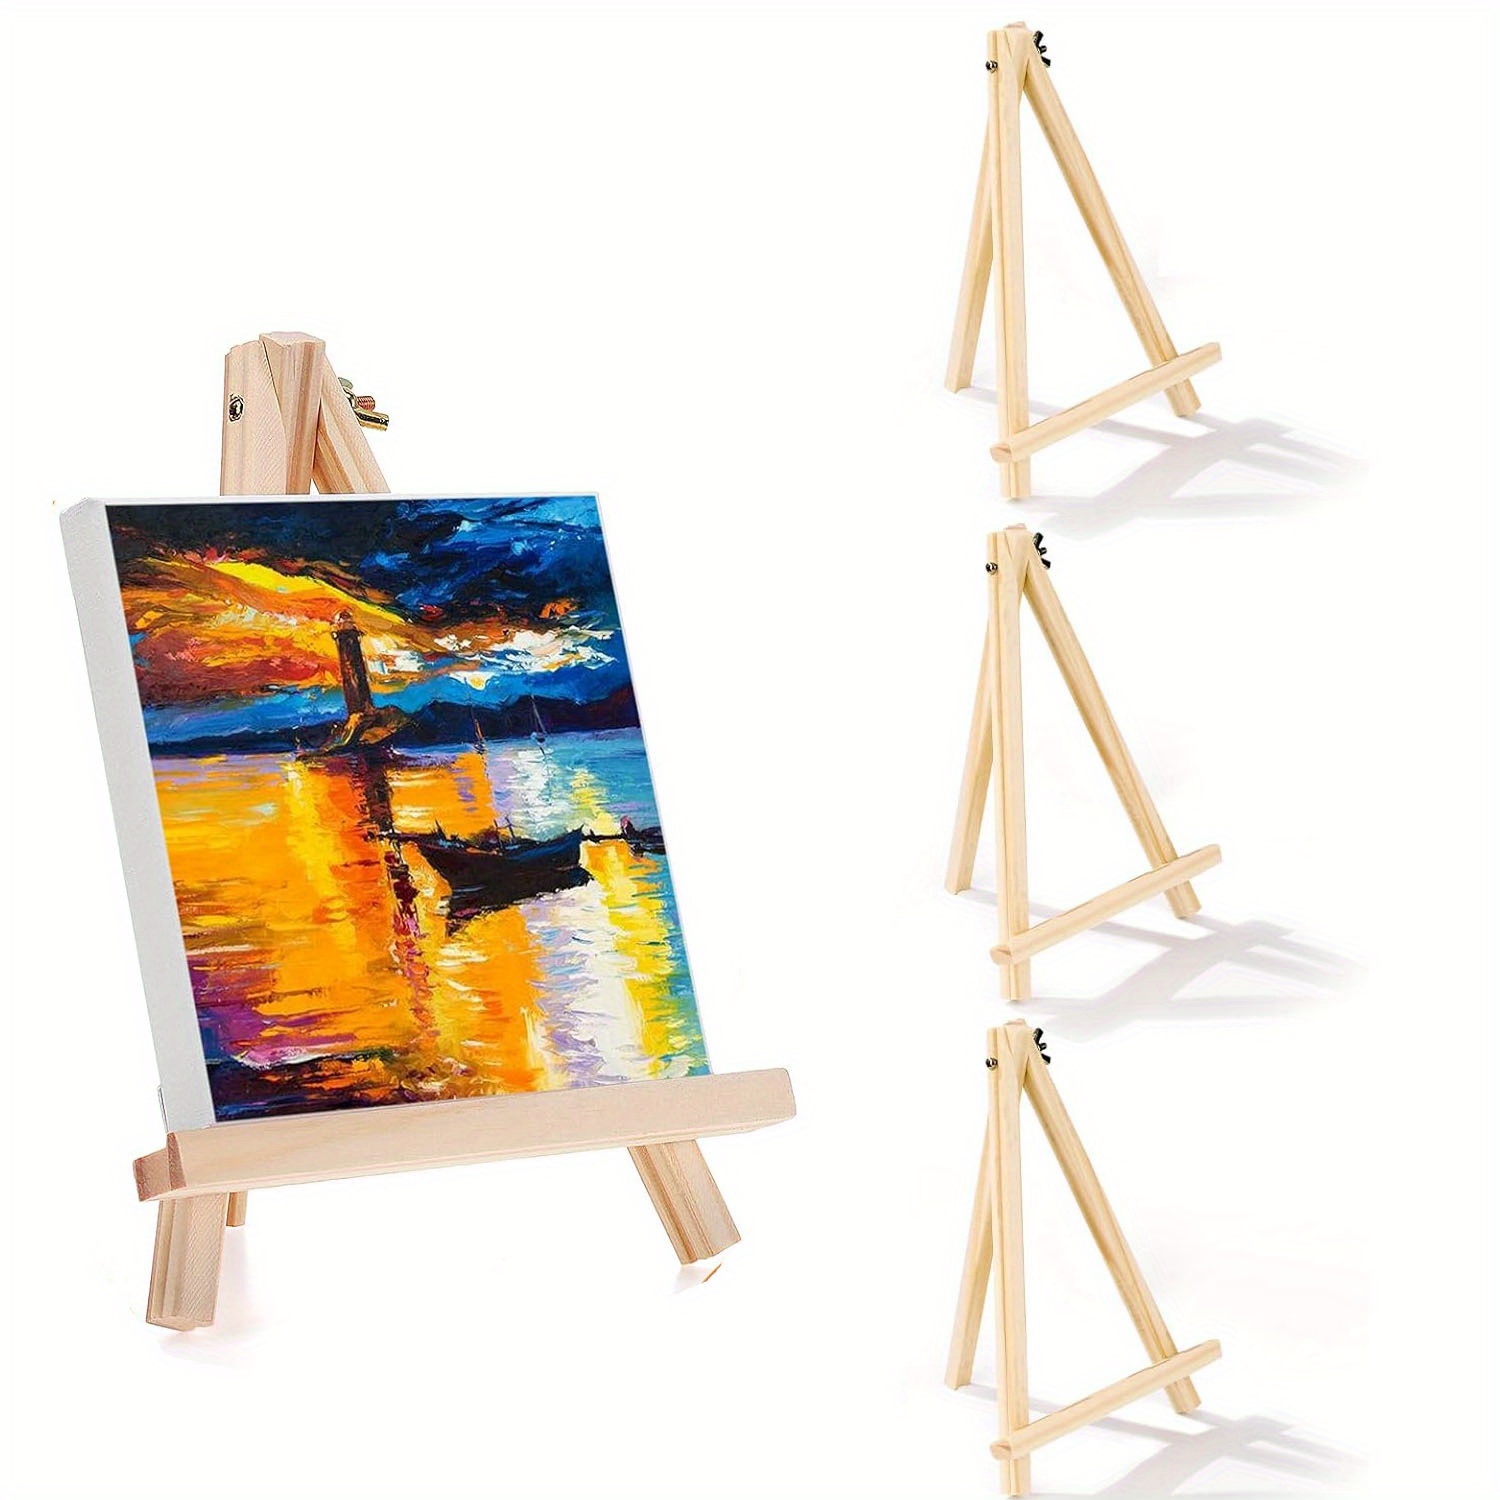 

4-piece 9" Wooden Easels - Versatile Tripod Stand For Canvas Art, Crafts & Painting Parties | Portable Tabletop Display For Photos & Signs